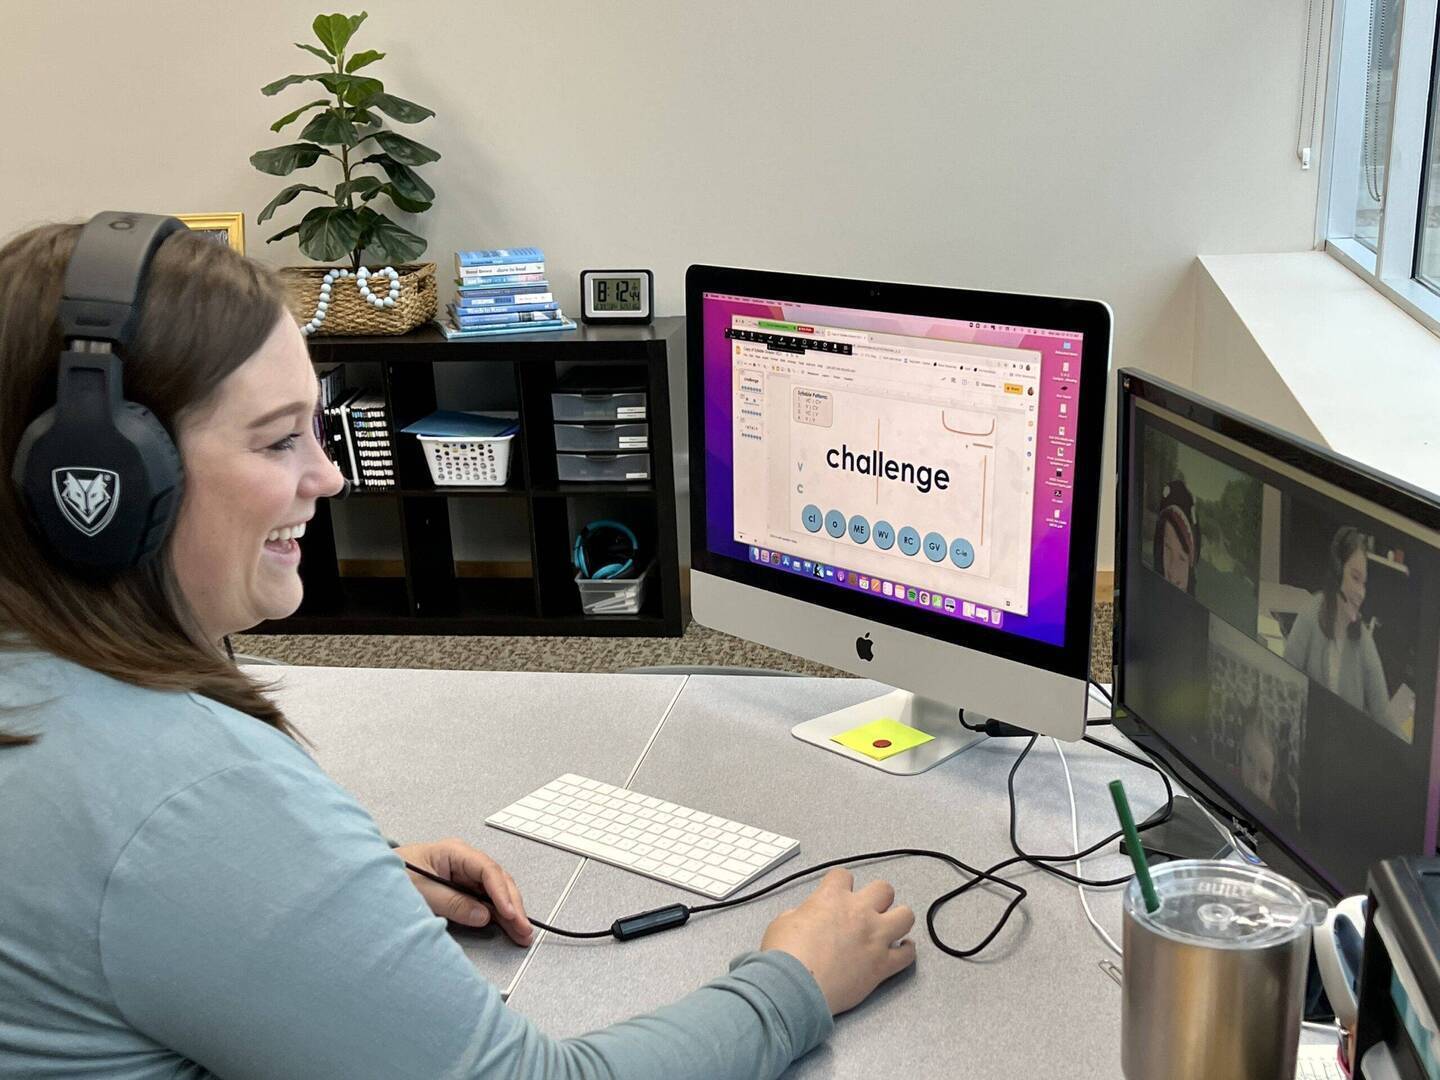 A team member works with a small group of 3 via online meeting.